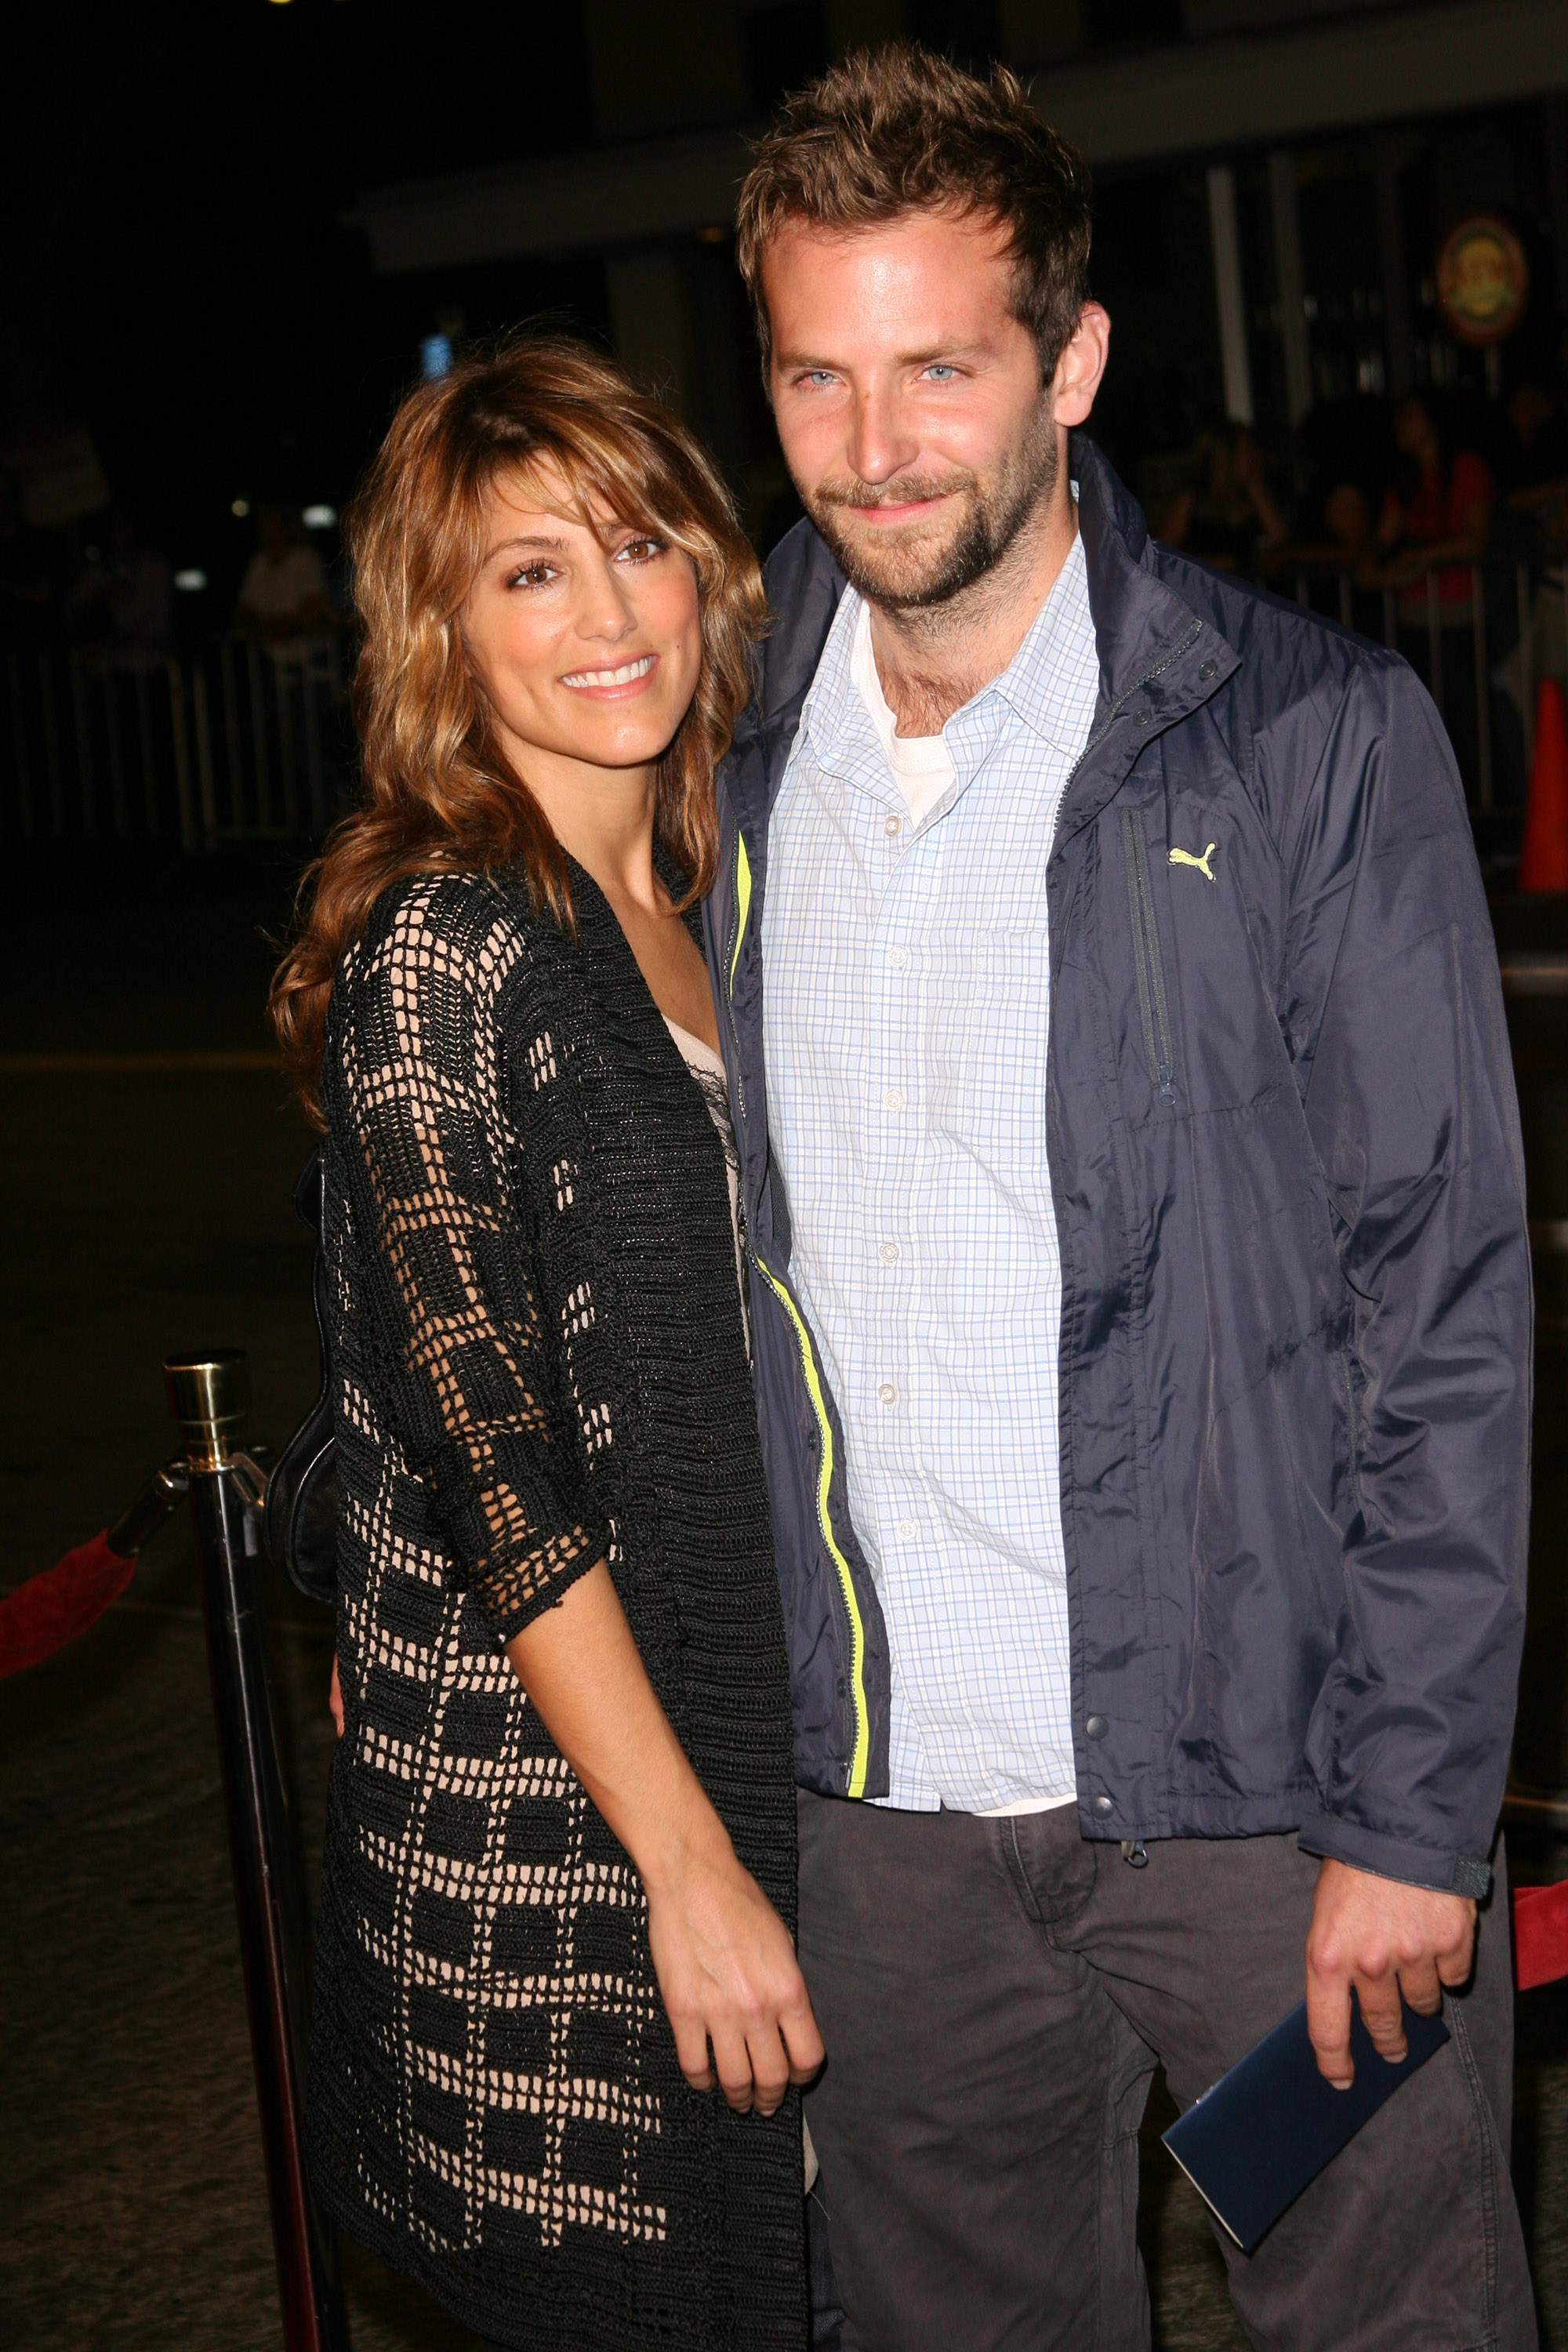 Jennifer Esposito and Bradley Cooper attending a film premiere in Westwood, California in 2006 | Source: Getty Images